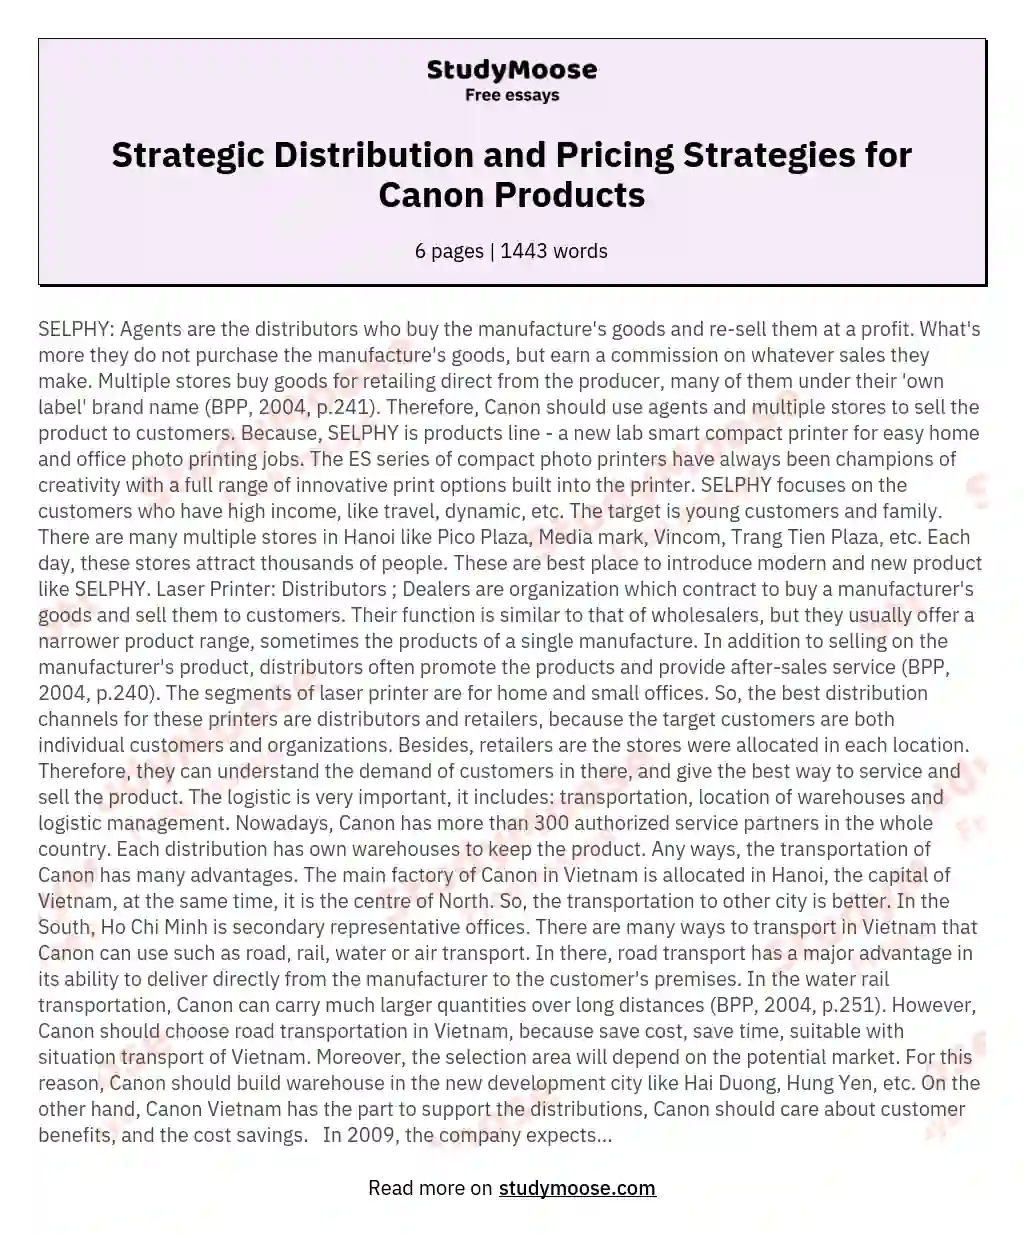 Strategic Distribution and Pricing Strategies for Canon Products essay